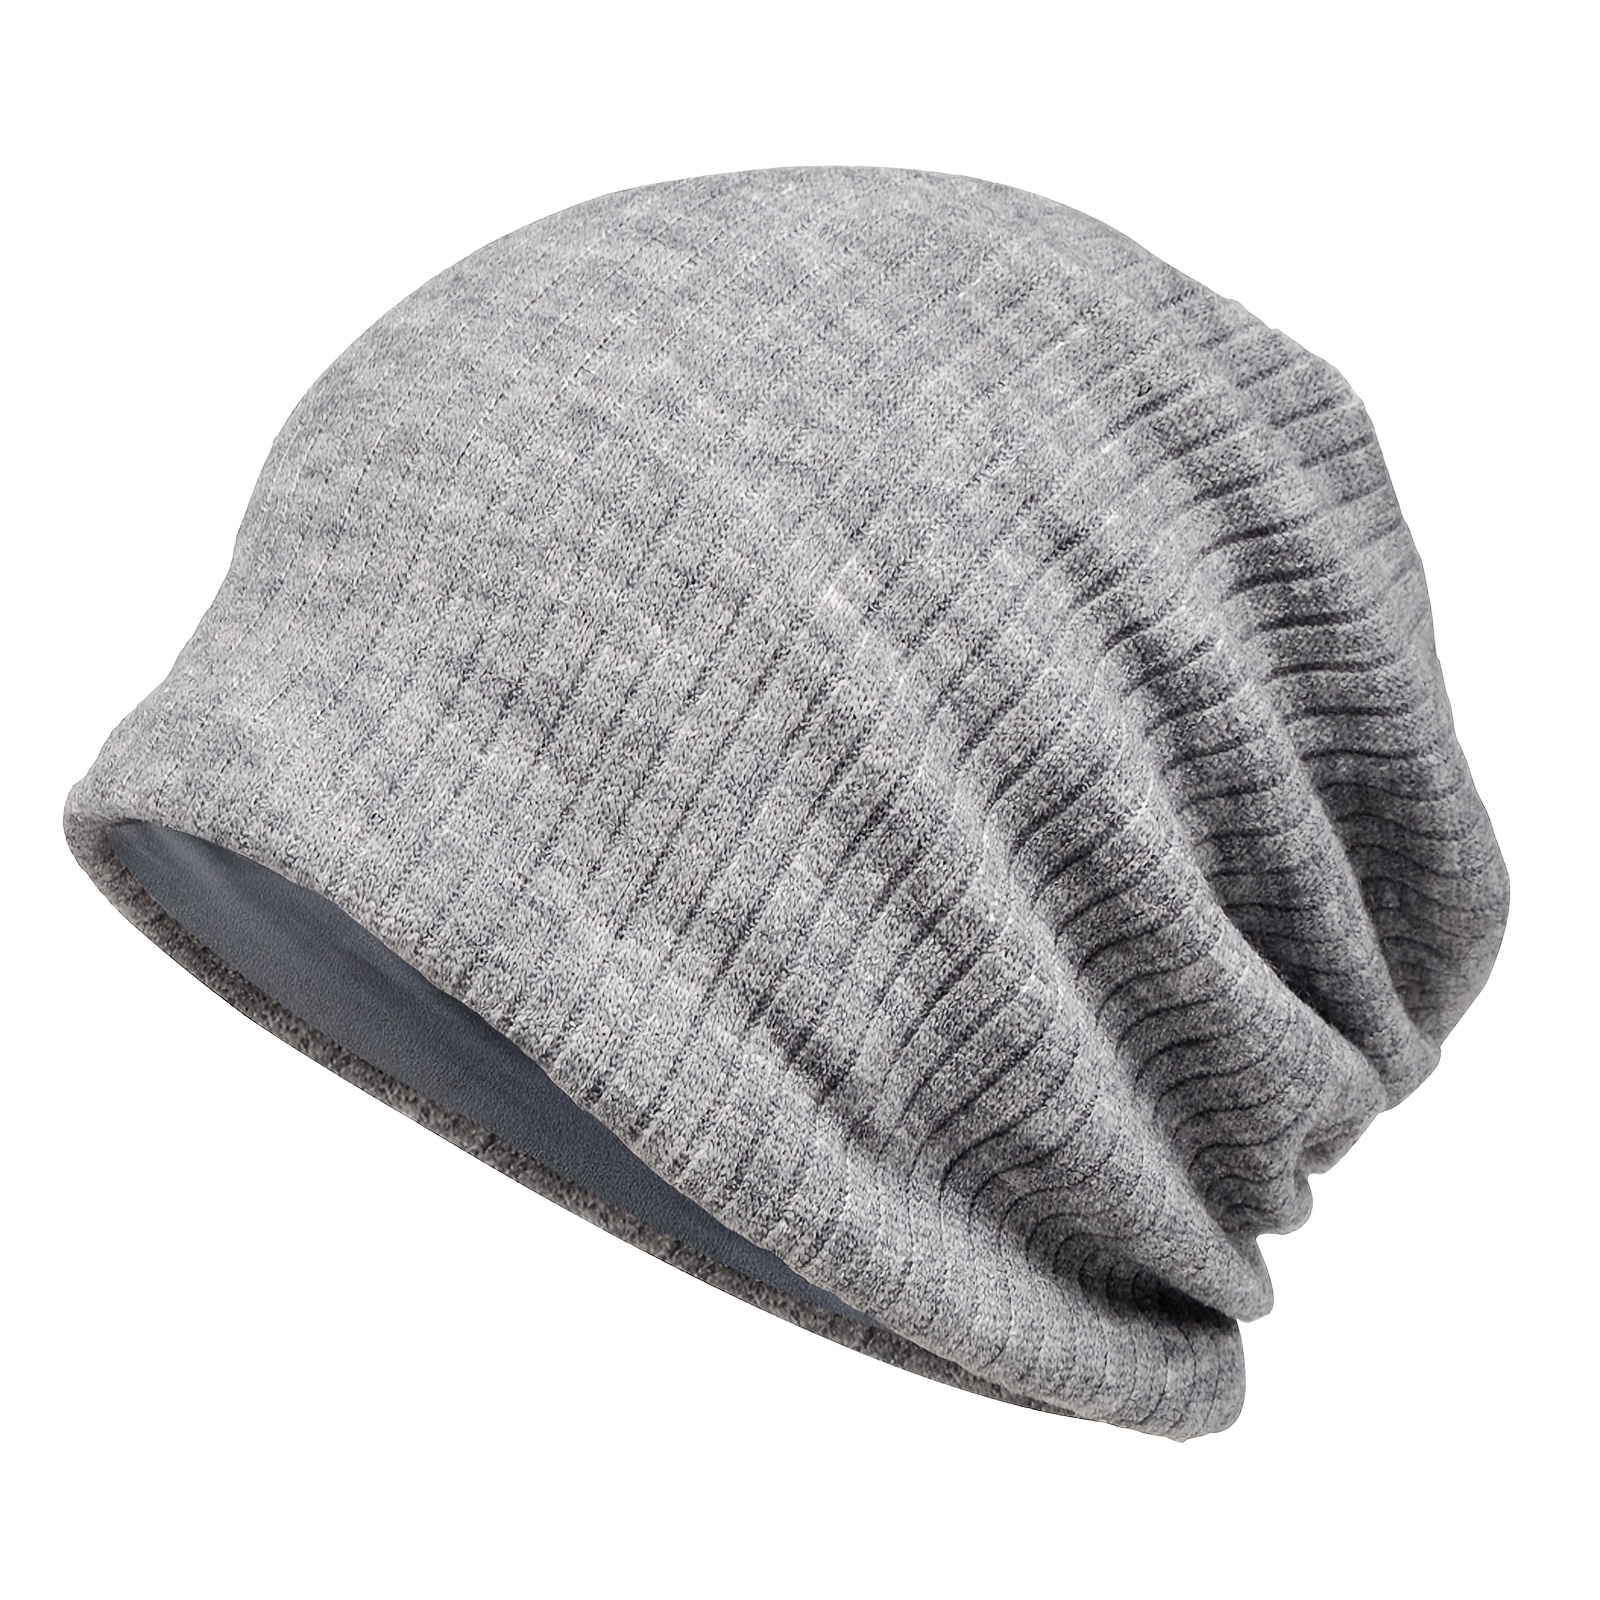 Soft Pleated Winter Fleece Lined Hat Black for Cancer, Chemo – Chemo  Fashion Scarf